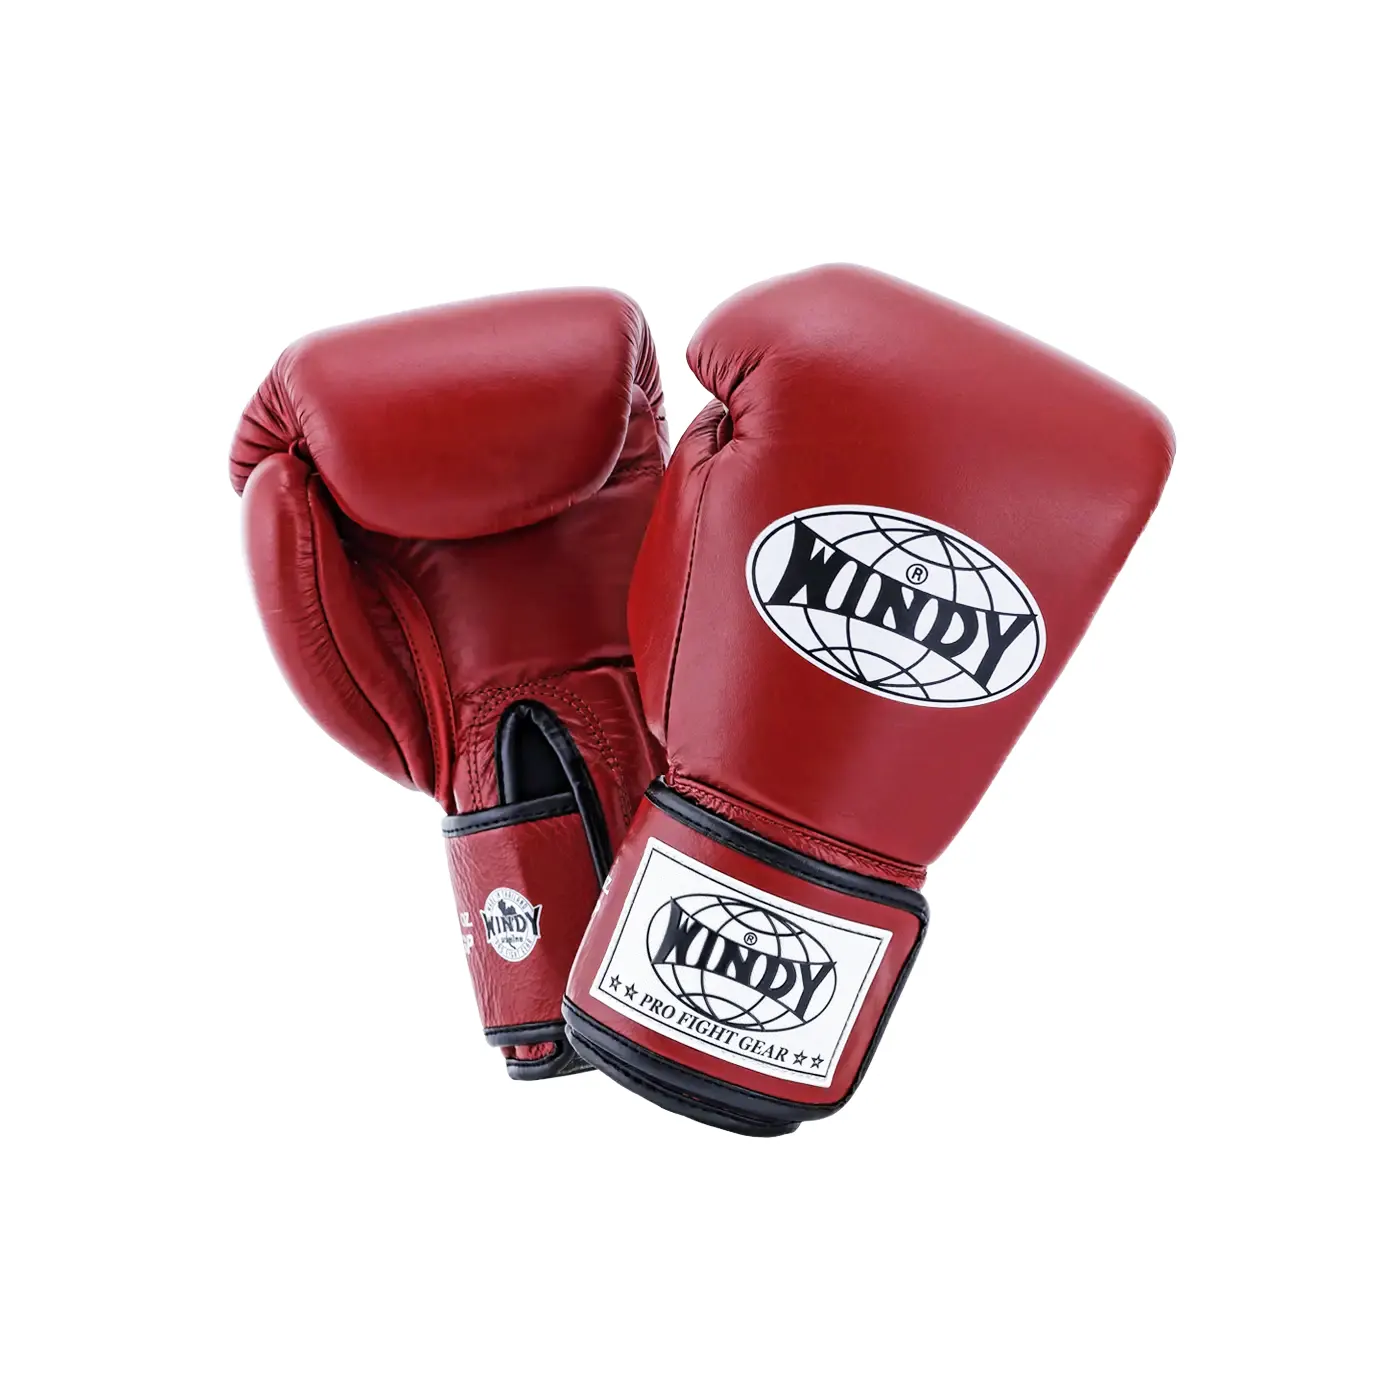 Buy Now Muay Gloves Red | Windy Boxing USA